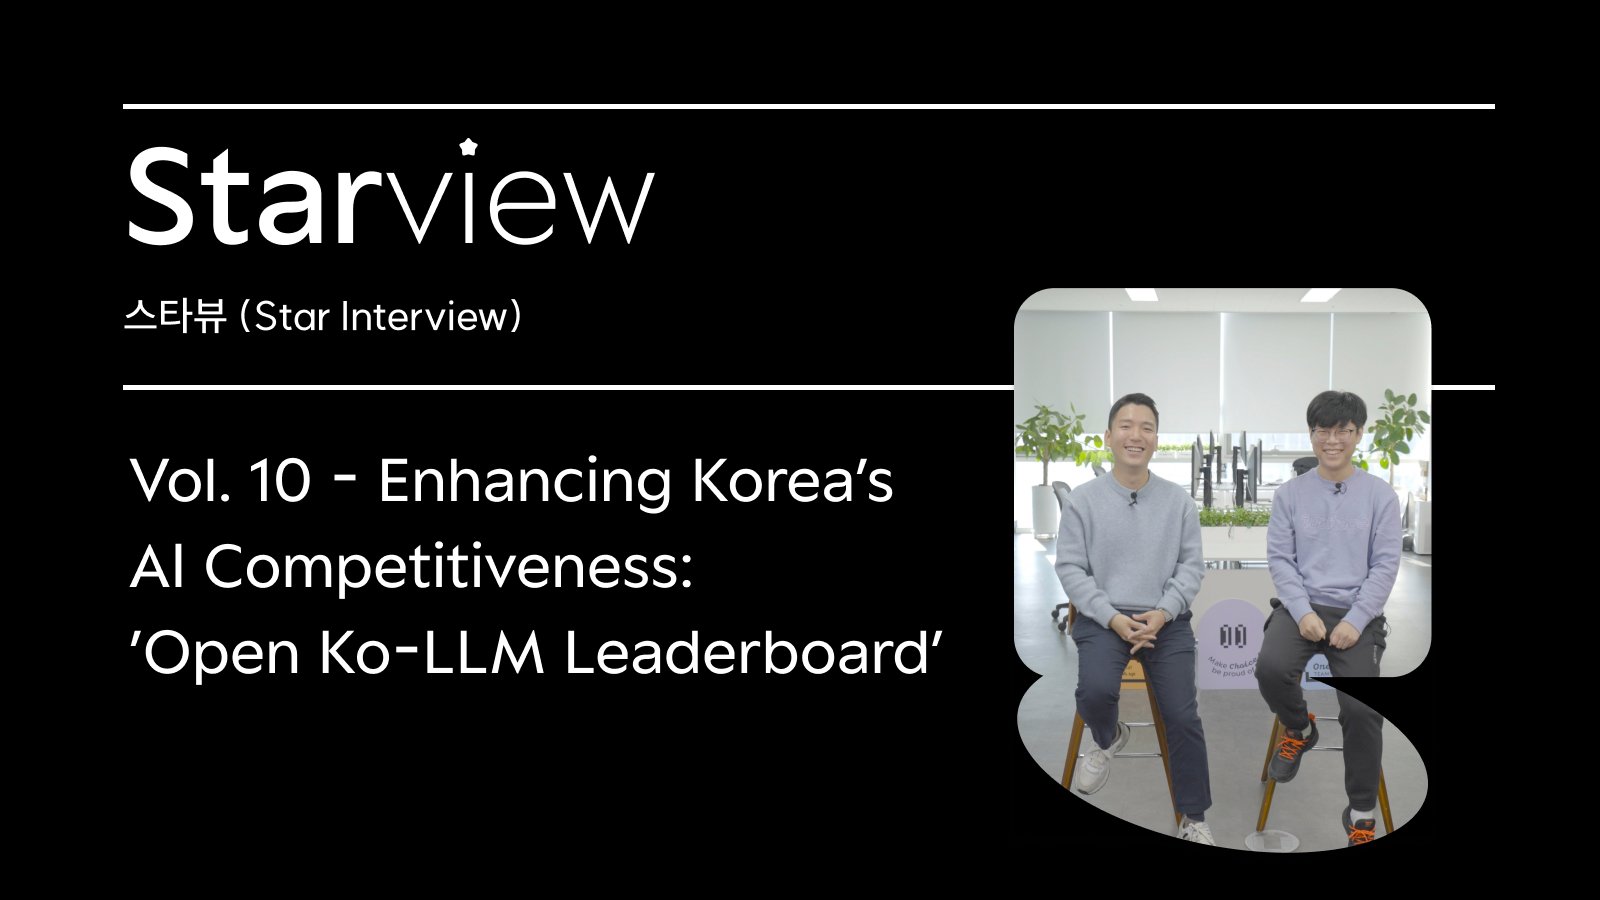 'Open Ko-LLM Leaderboard' that strengthens Korean AI competitiveness - [Starview Vol. 10]